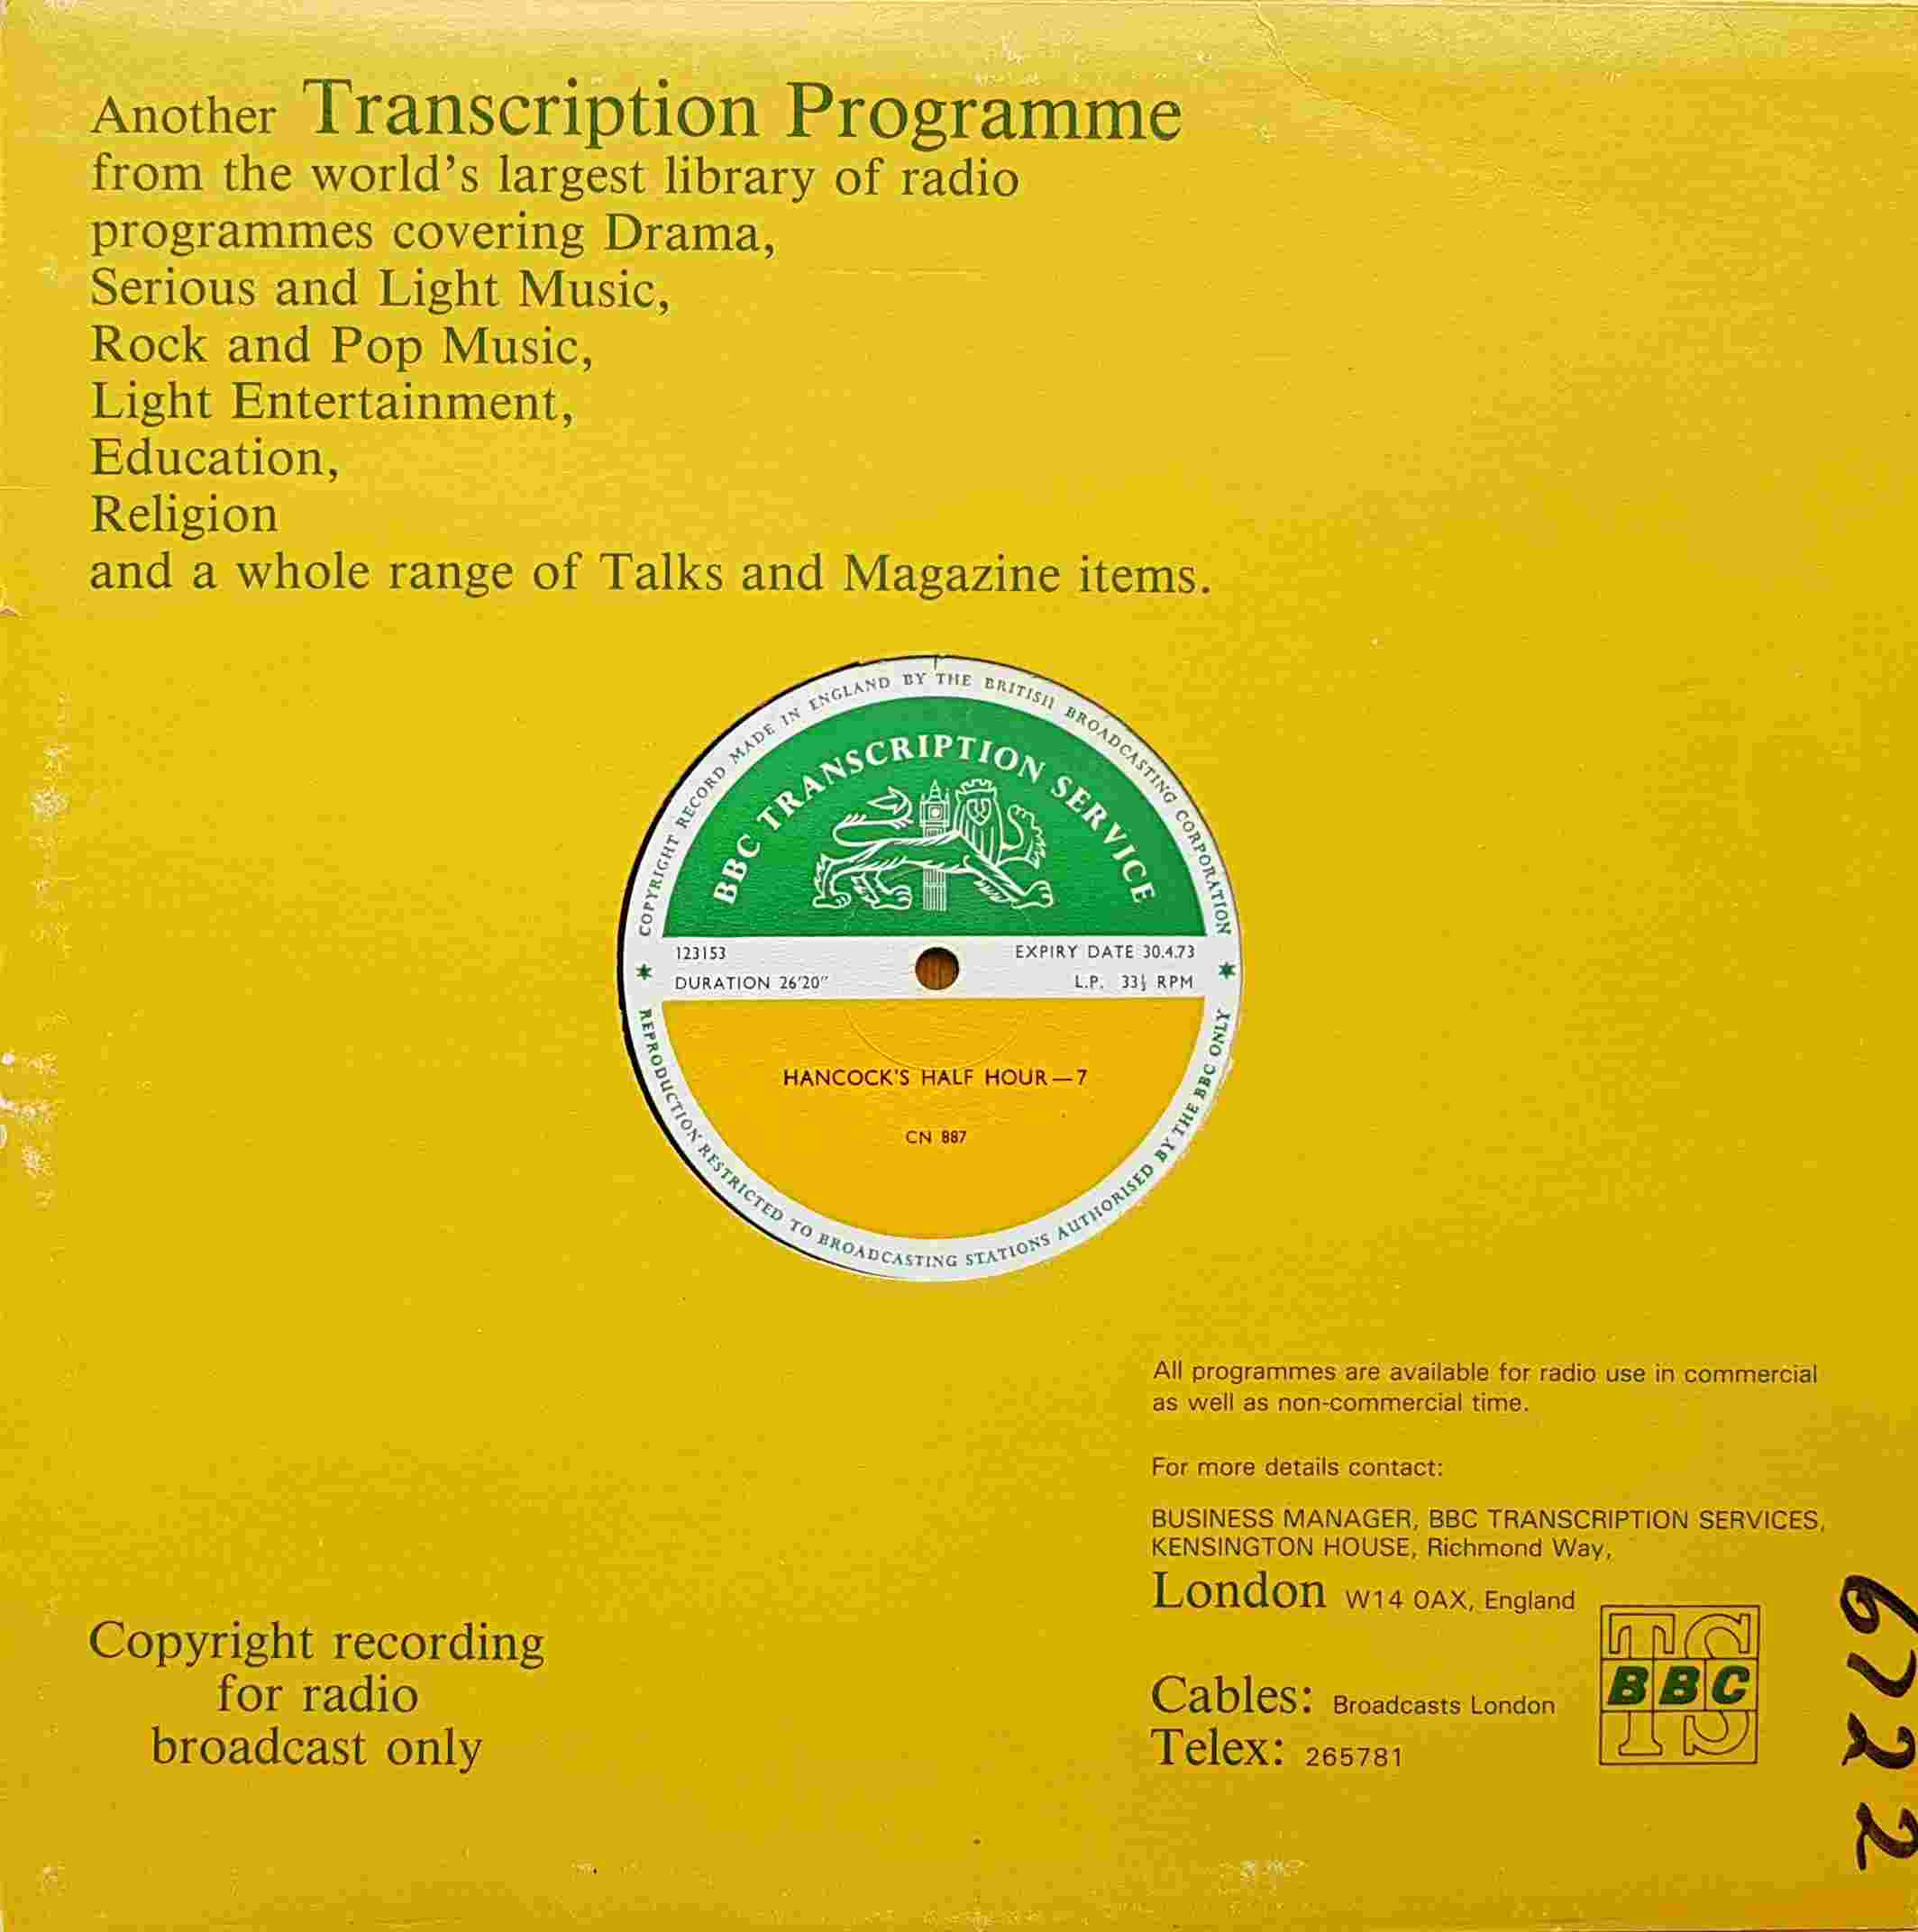 Picture of CN 887 4 Hancock's half hour - 7 & 8 by artist Tony Hancock from the BBC albums - Records and Tapes library